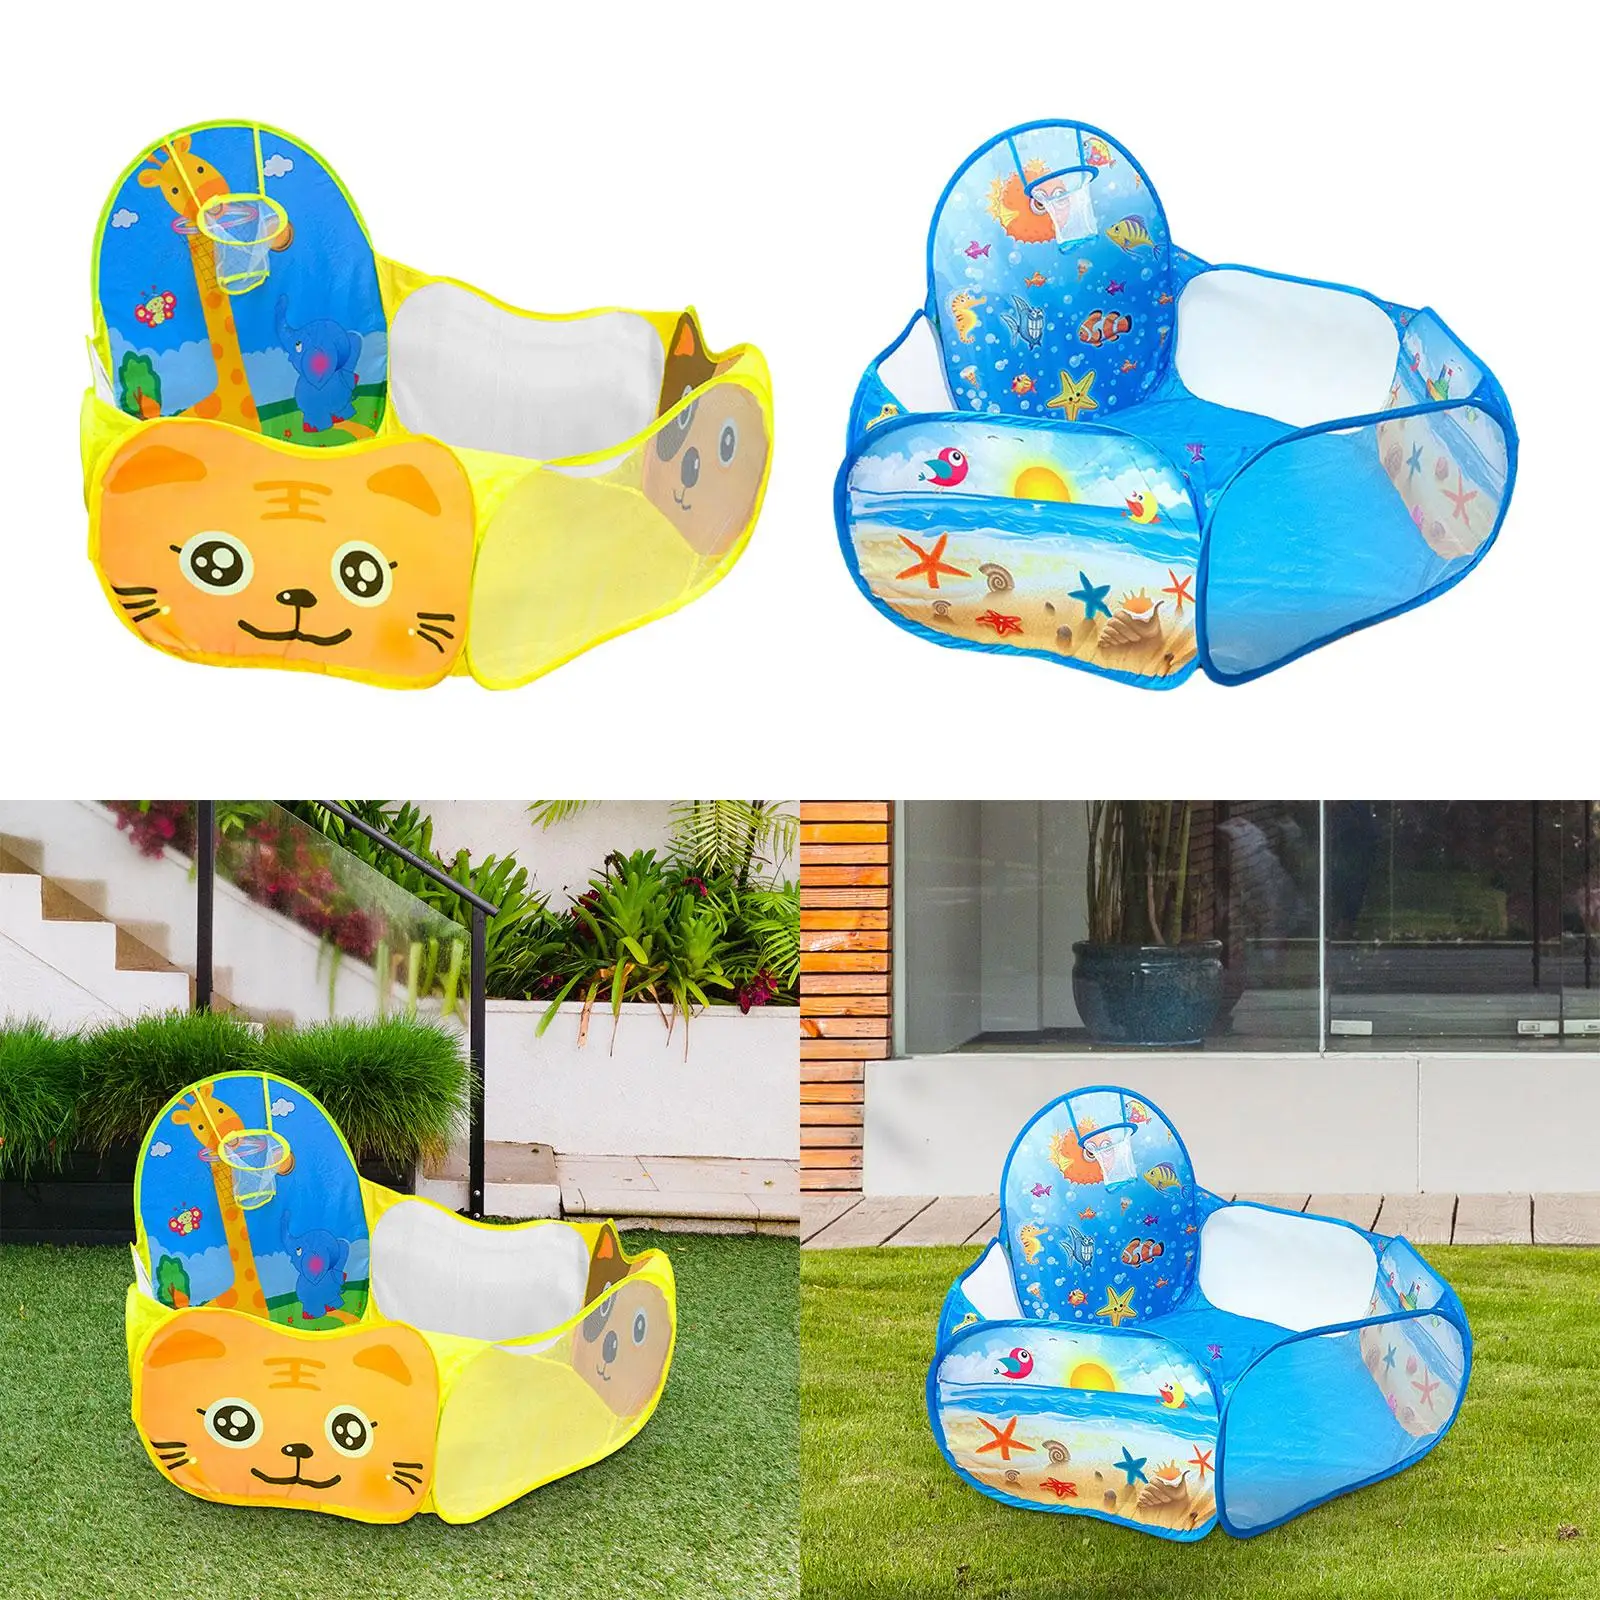 Childrens Ball Play Tent Playpen Ball Pool Outdoor Indoor Play